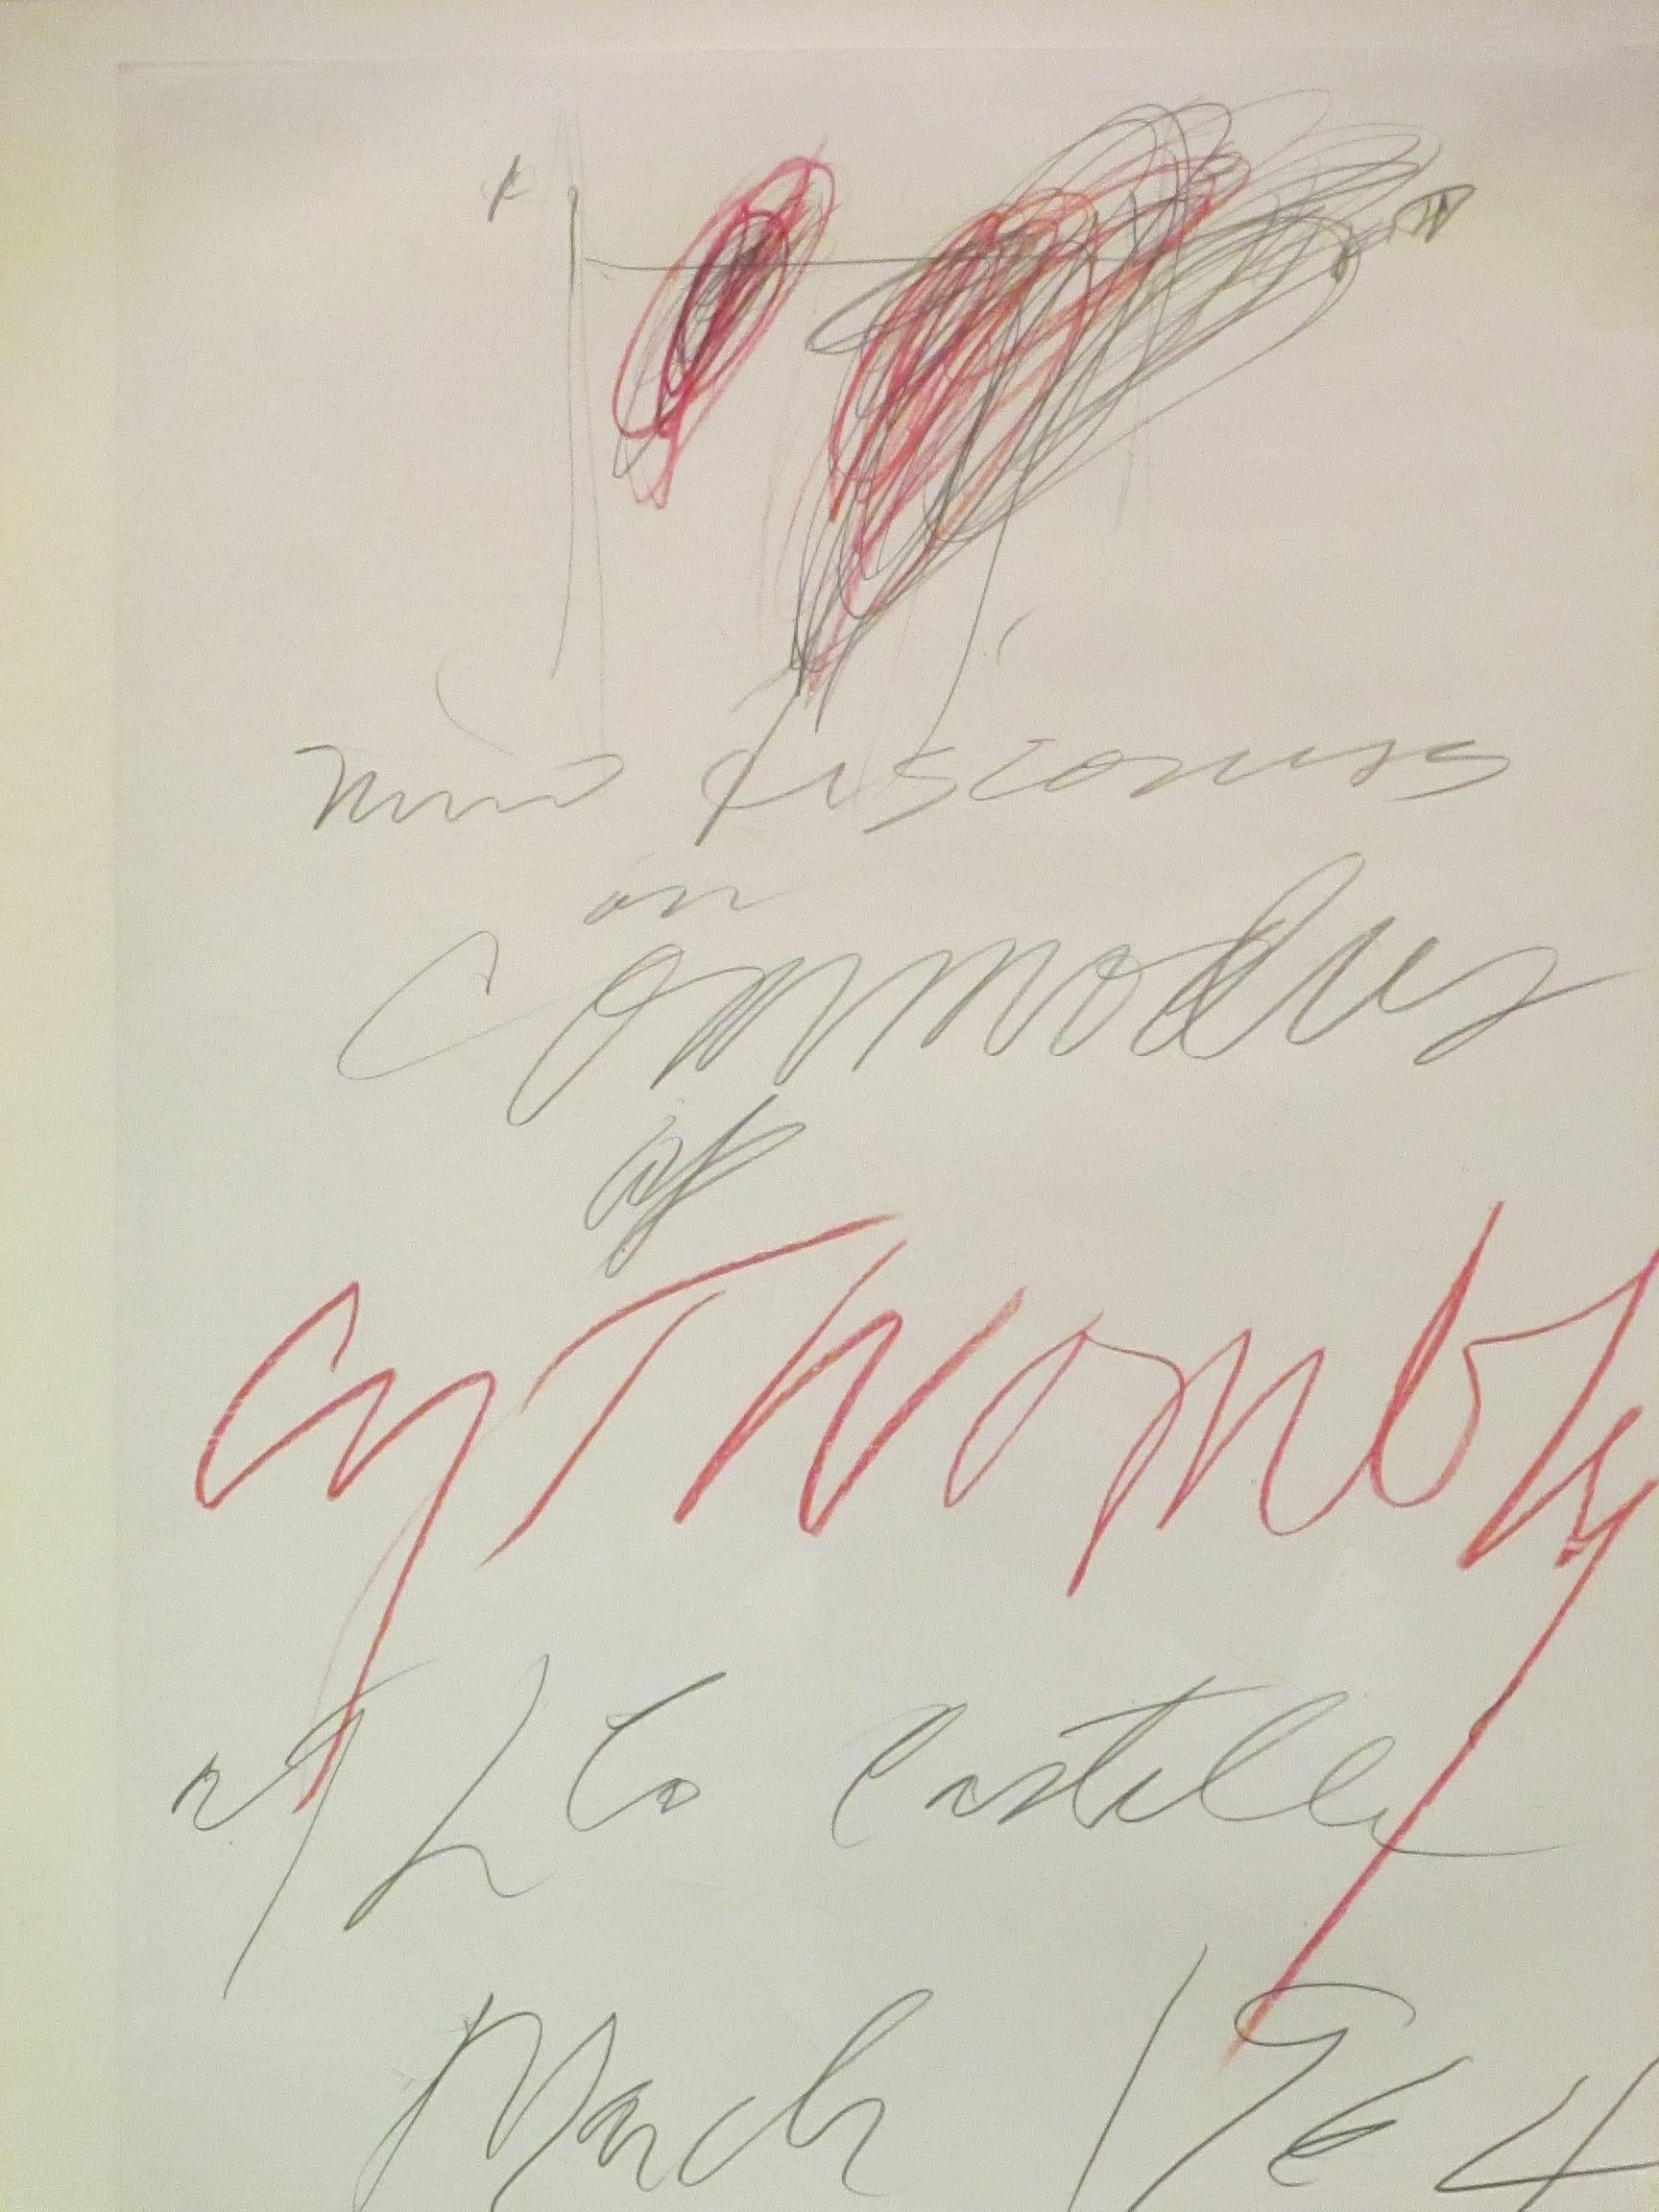 cy twombly prints